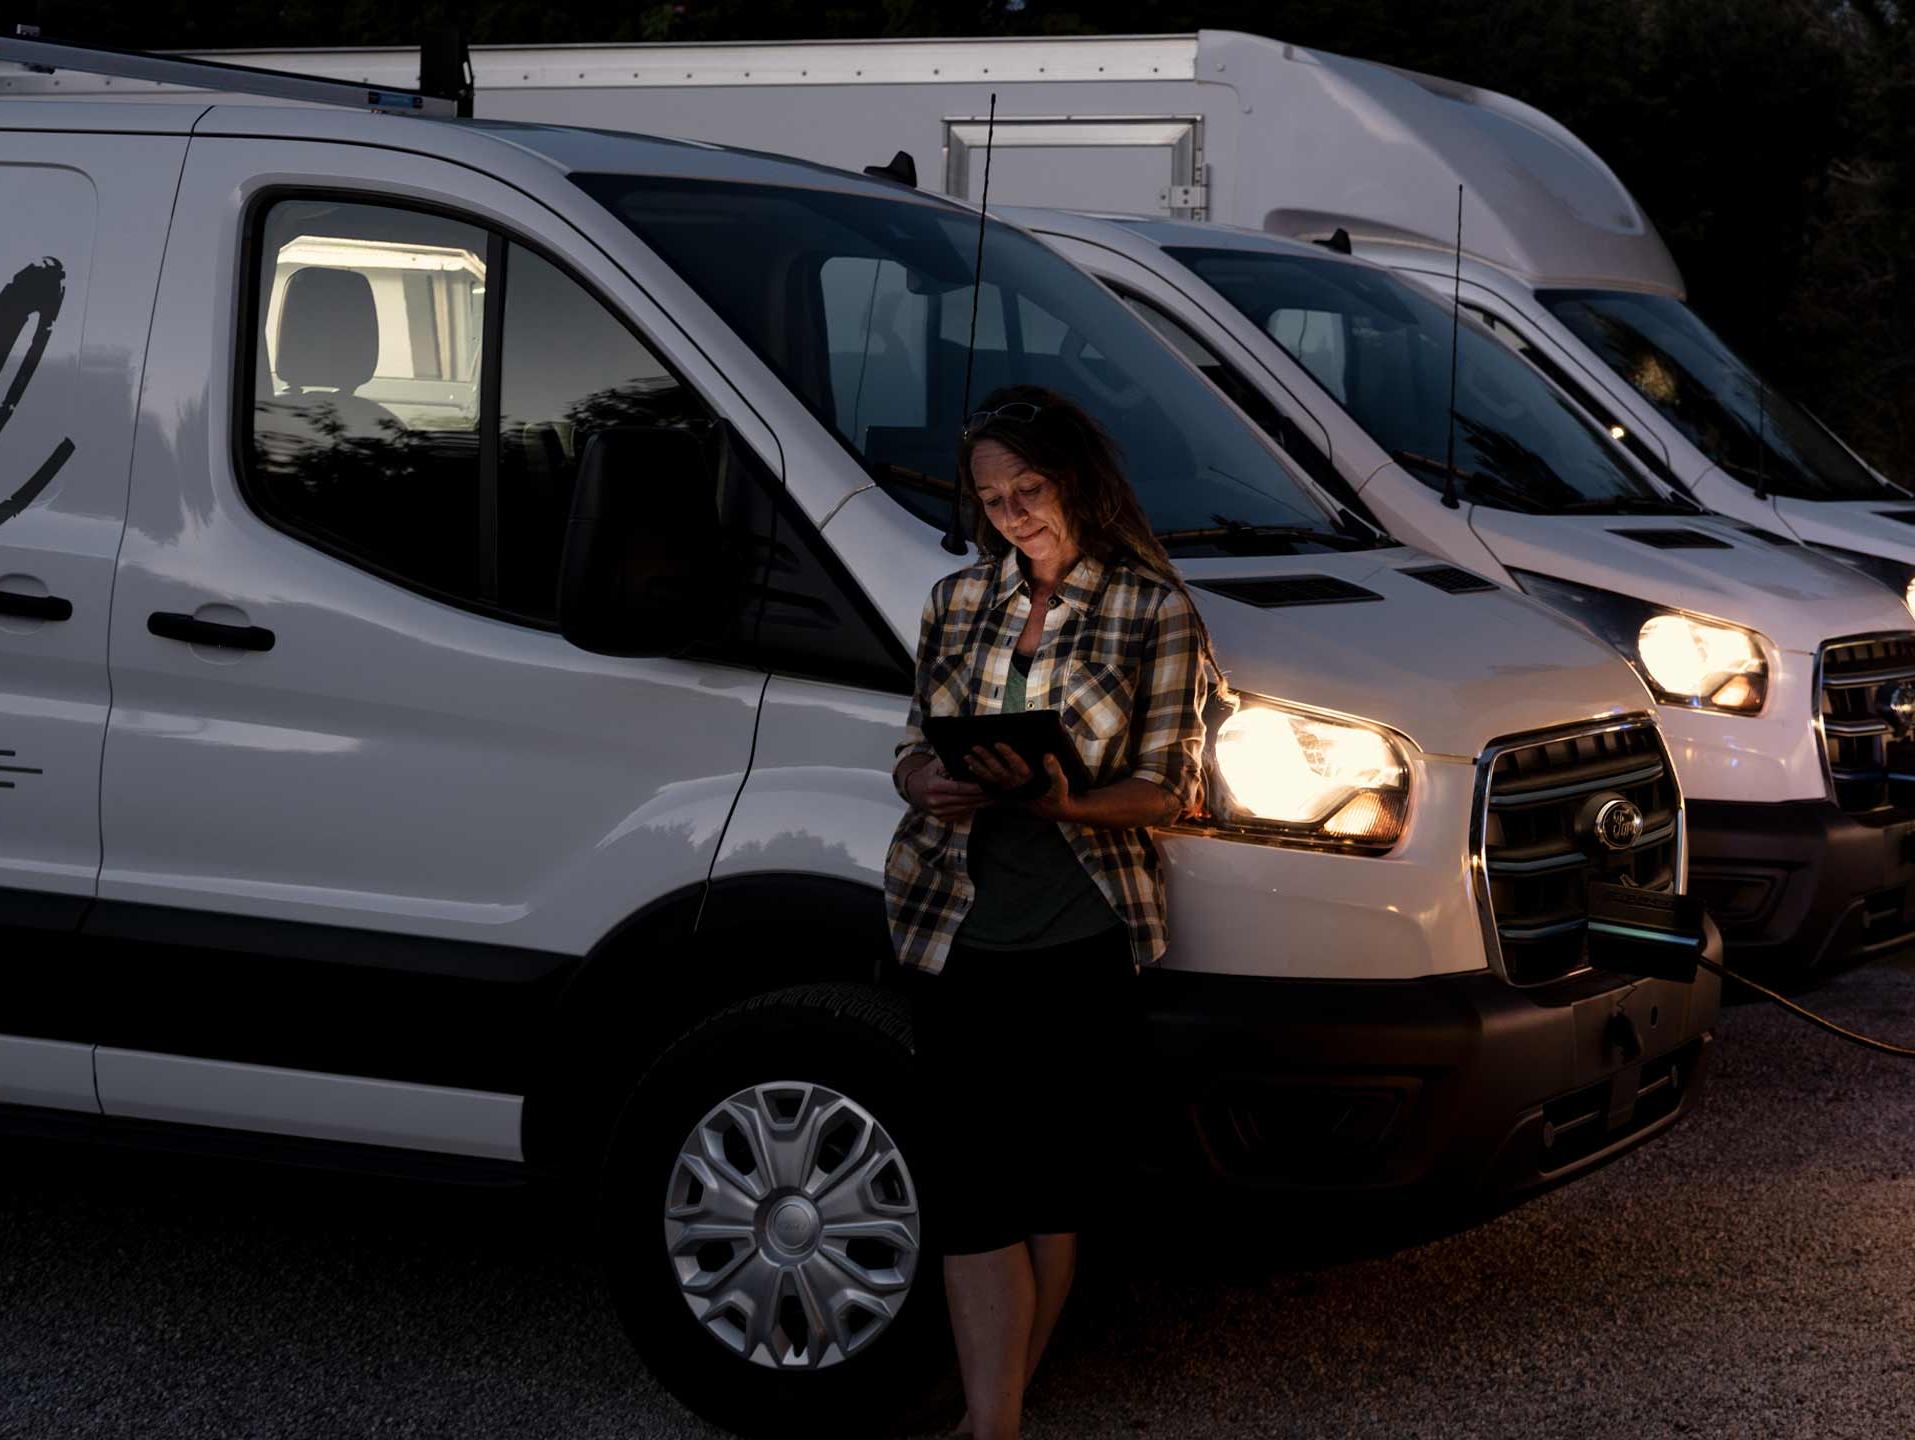 A row of 2024 E-Transits at night charging up with a woman leaning against one of them